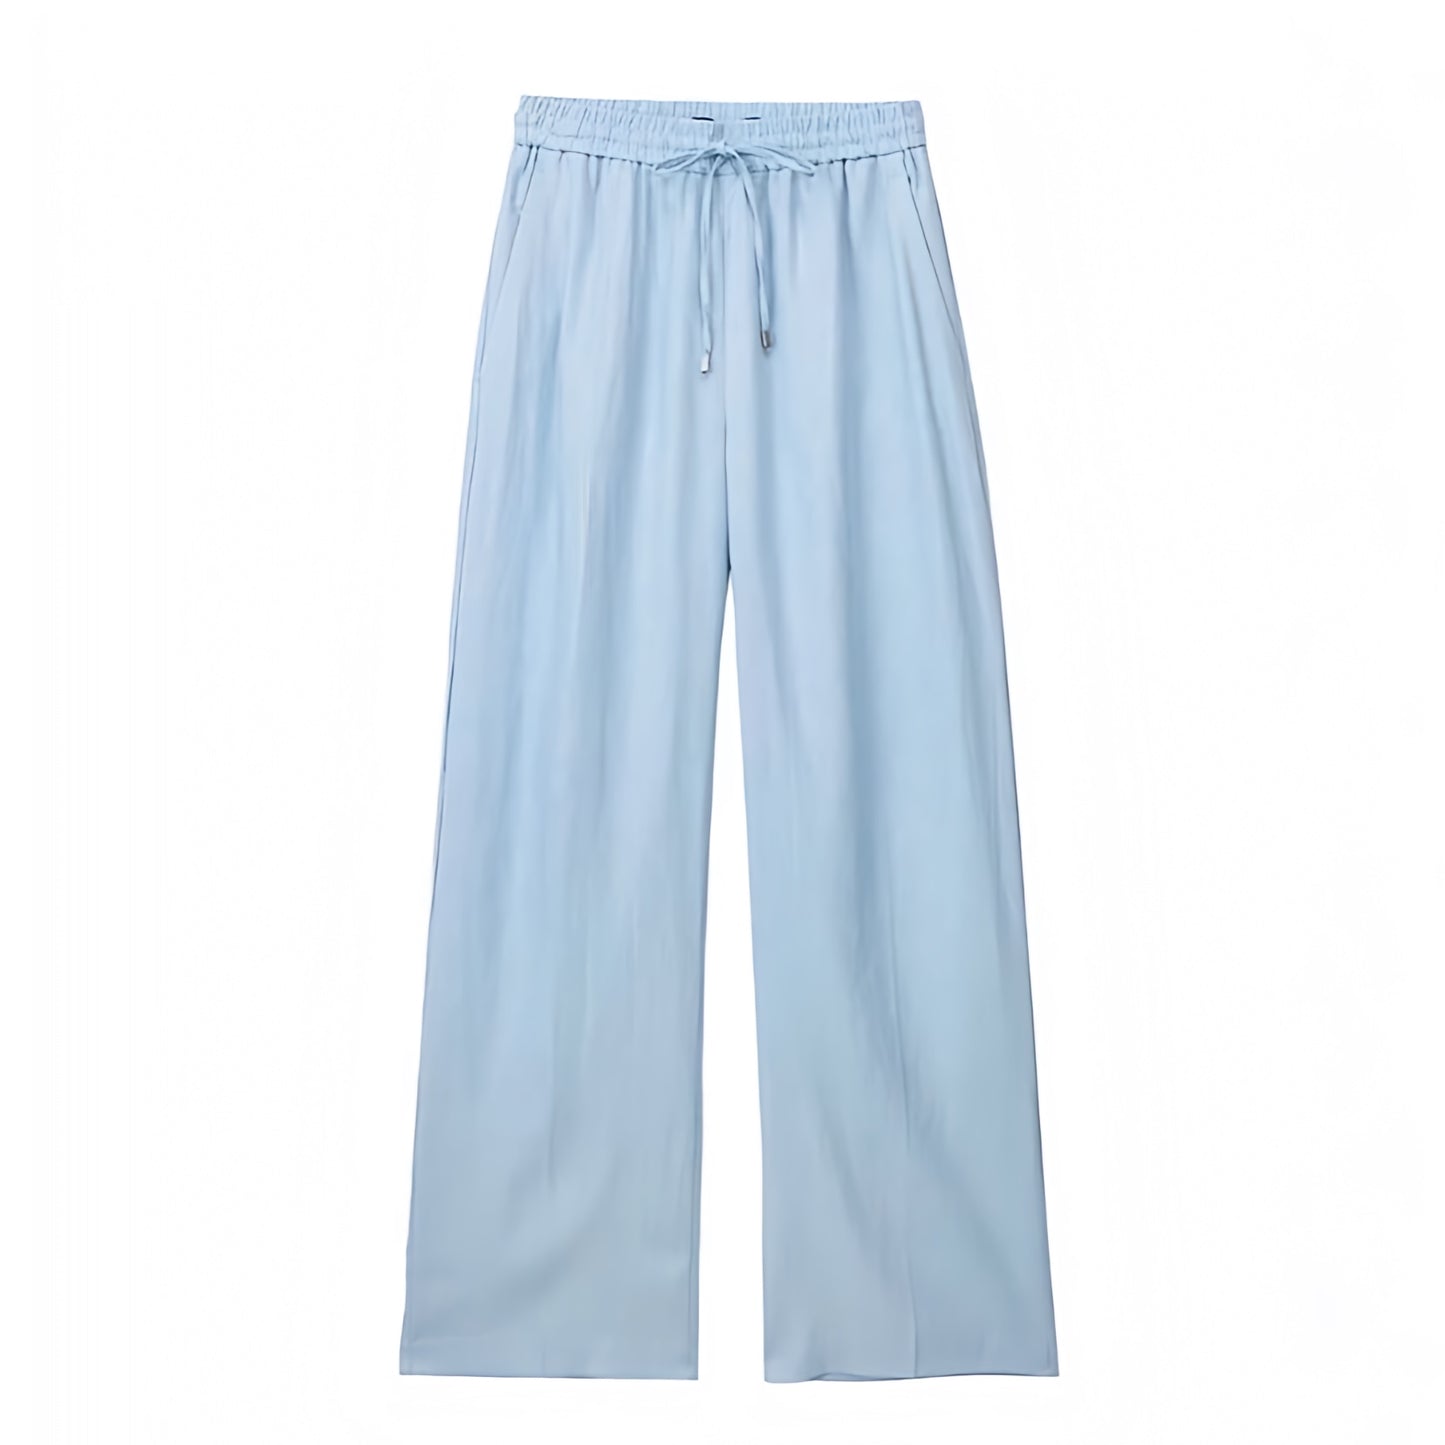 light-blue-cotton-linen-mid-low-rise-waisted-draw-string-tie-fitted-waist-straight-wide-leg-loose-trouser-pants-joggers-sweatpants-with-pockets-comfortable-cozy-women-ladies-chic-trendy-spring-2024-summer-elegant-casual-feminine-lounge-european-vacation-beach-wear-coastal-granddaughter-zara-revolve-aritzia-brandy-melville-pacsun